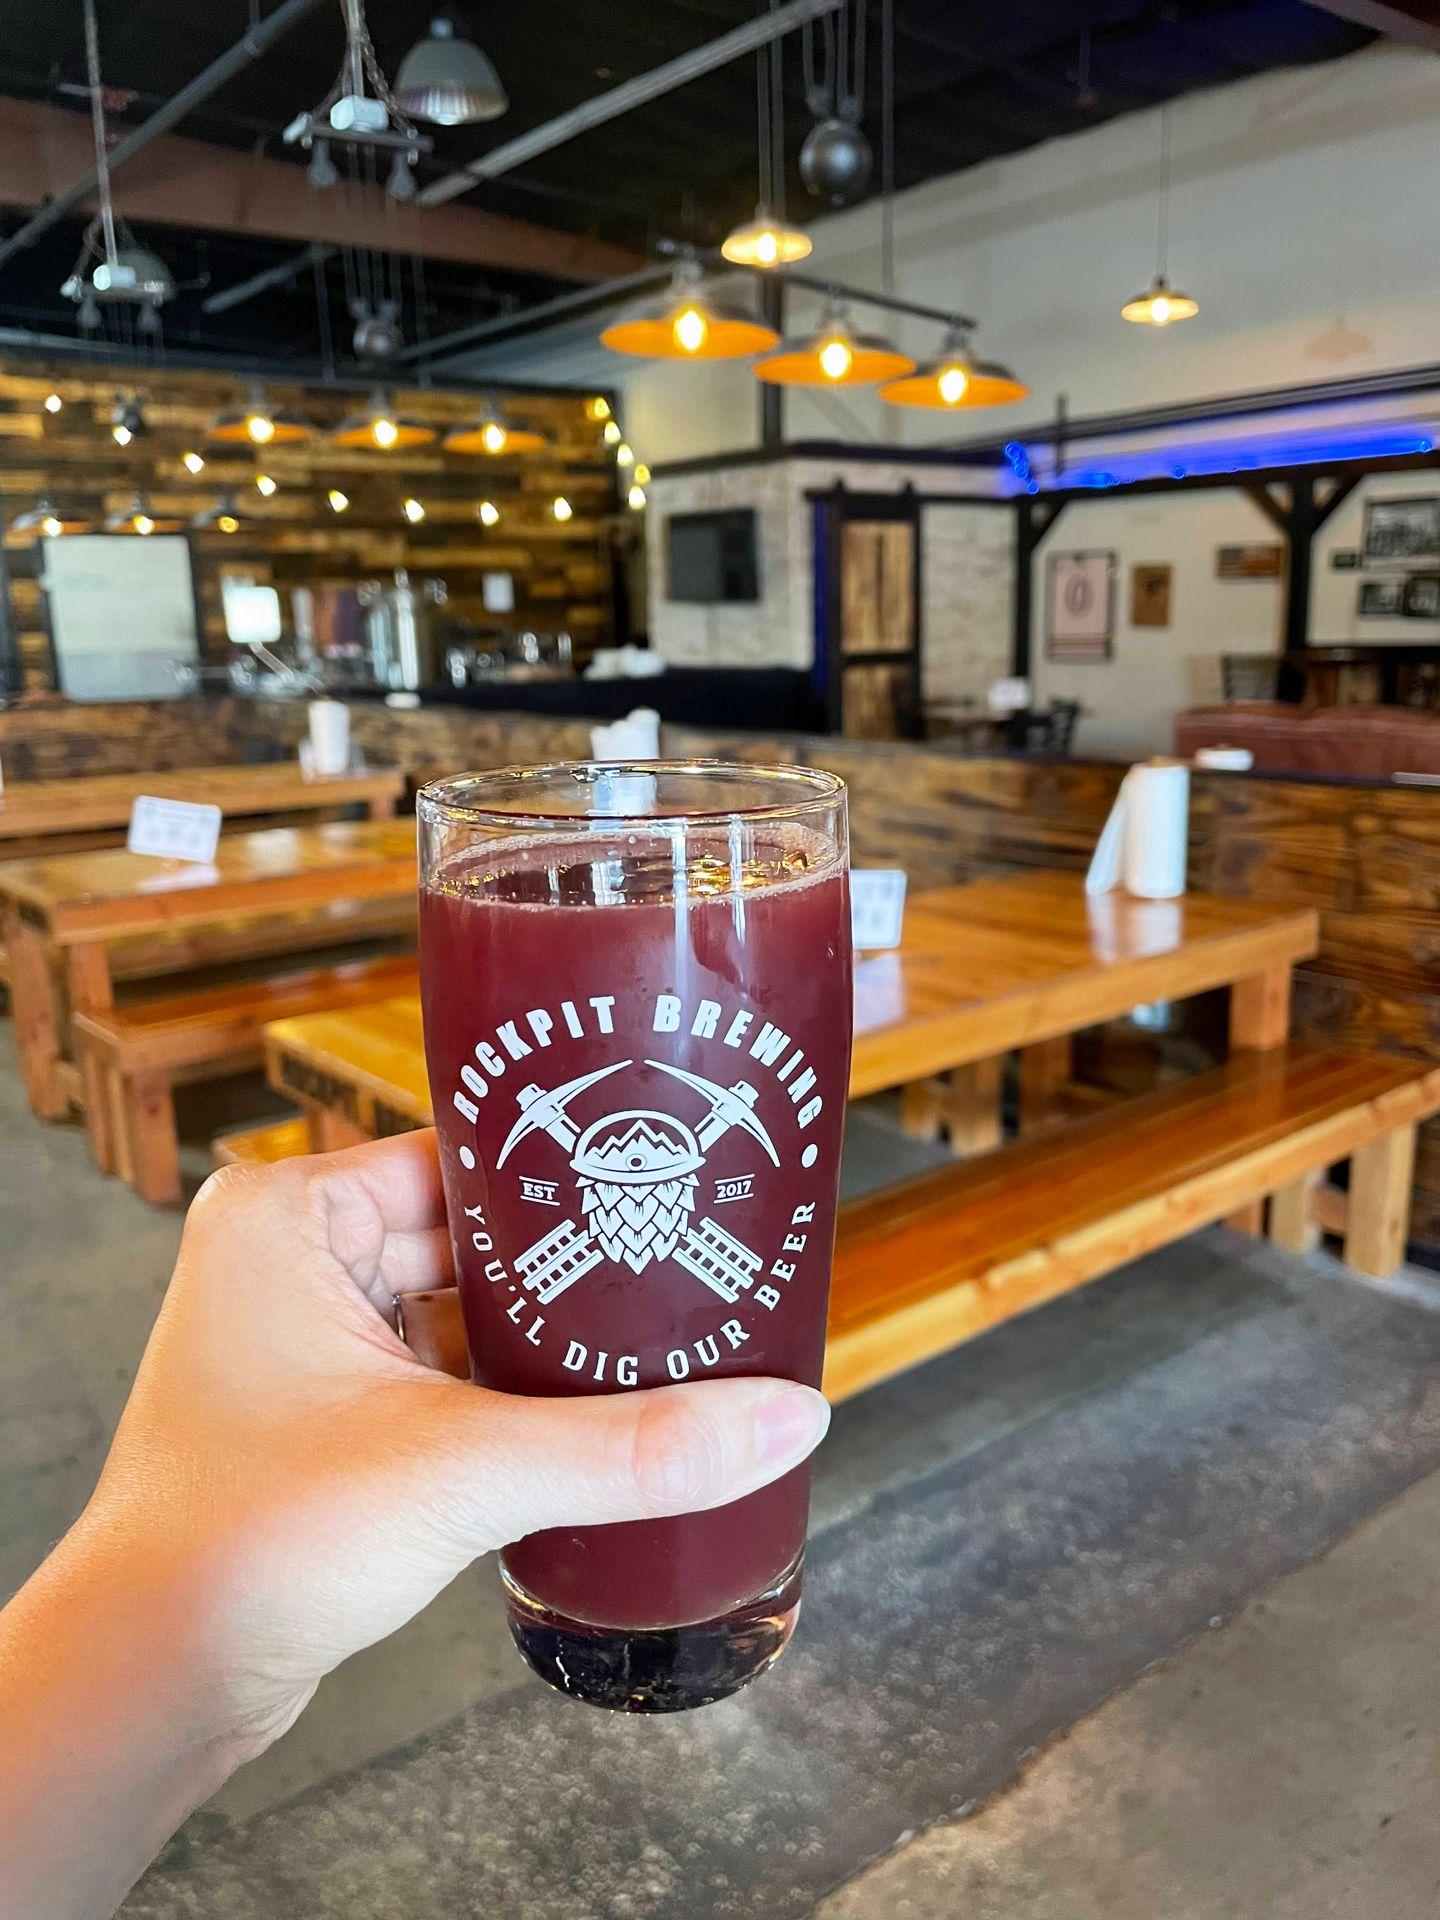 Holding up a smoothie sour beer inside of Rockpit Brewing. There are several long, wood tables in the background.